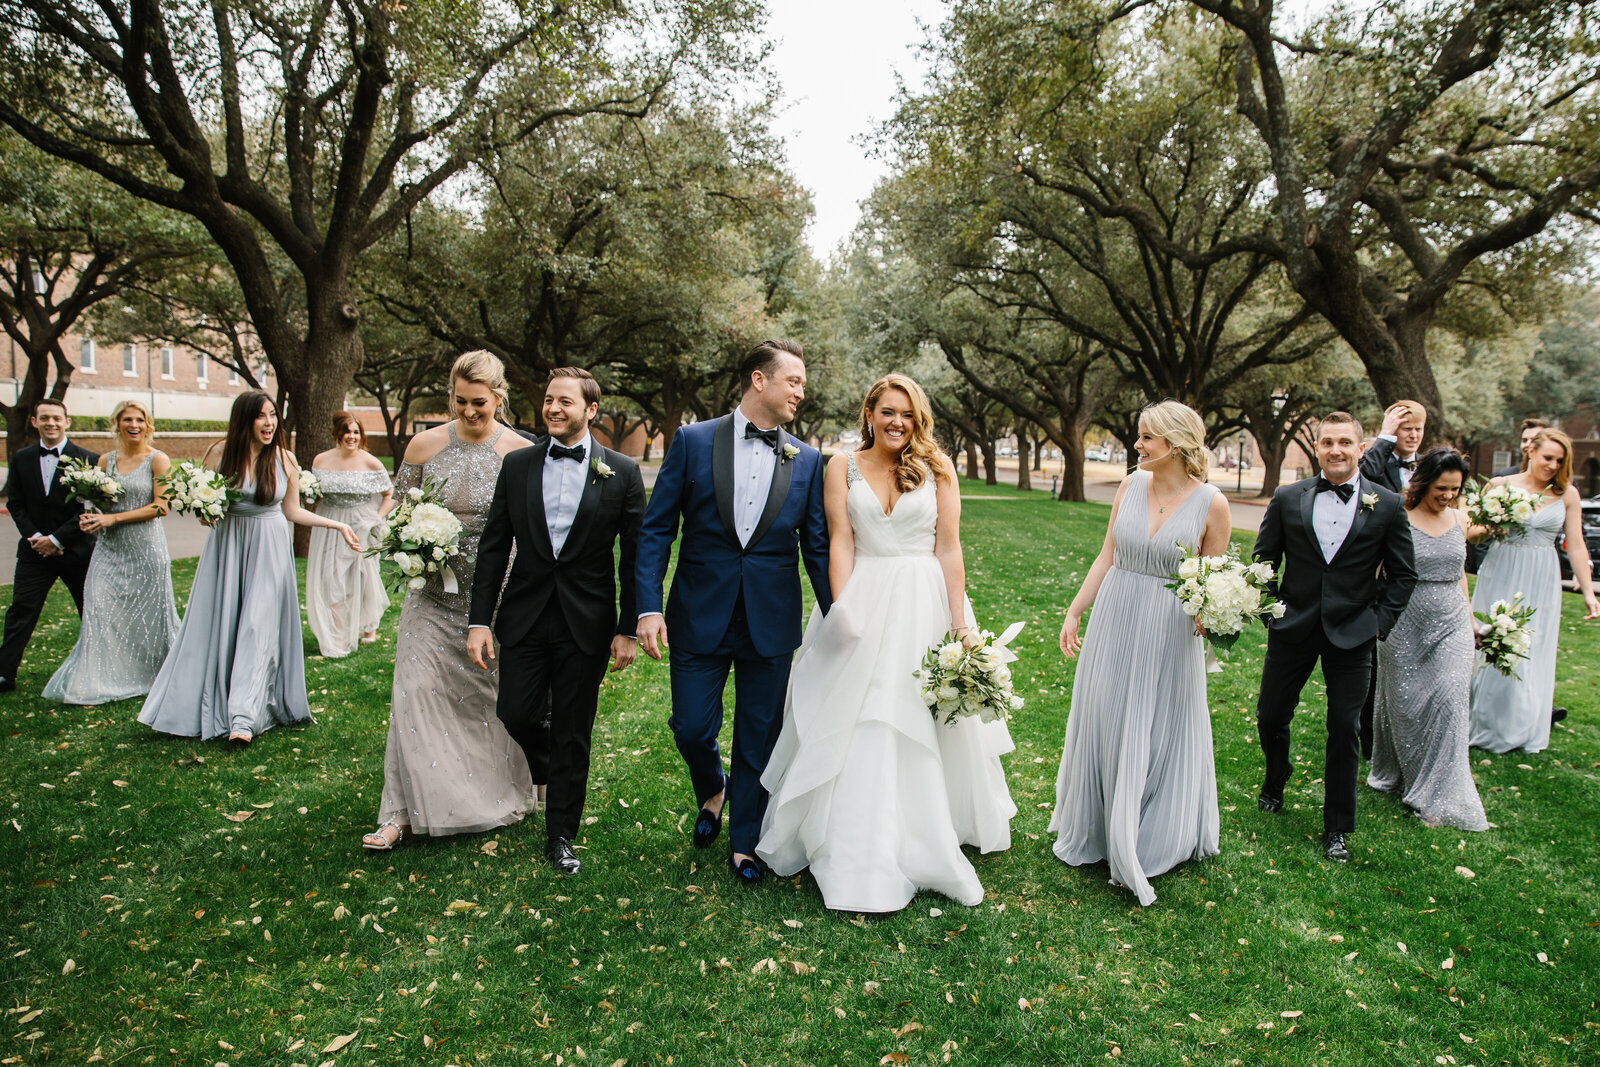 A group of bridesmaids and groomsmen walking in the grass at a Texas wedding.